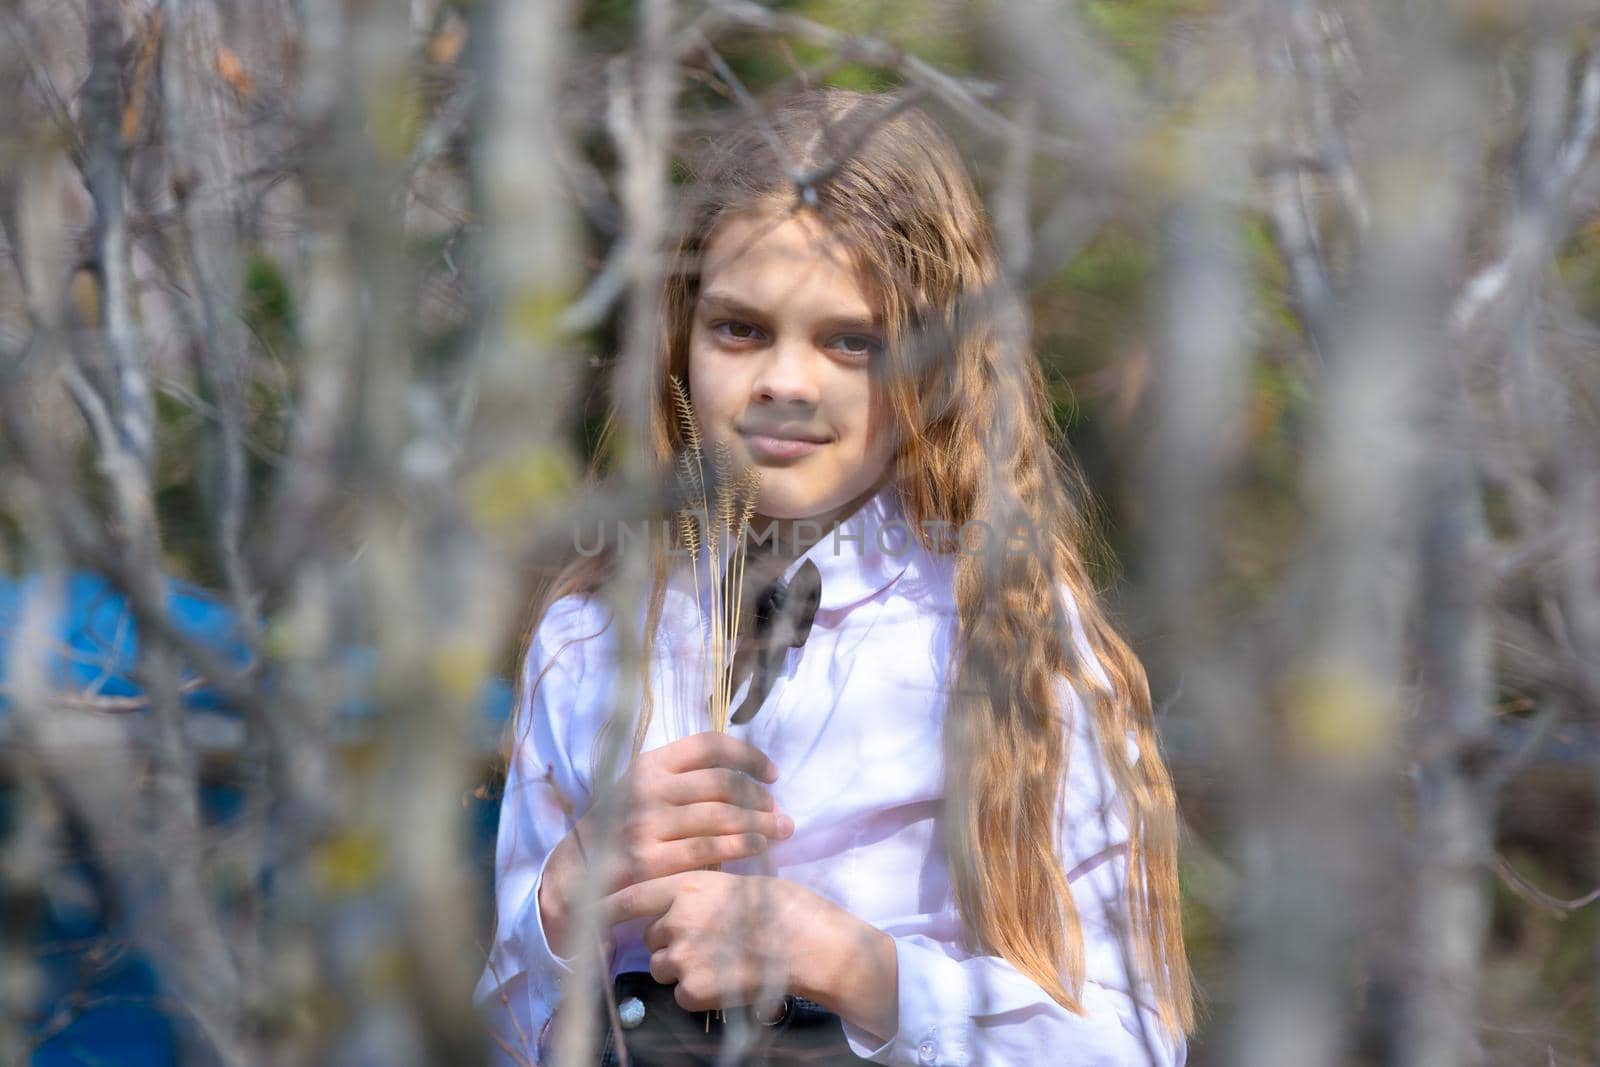 A girl stands with dried wildflowers, in the foreground blurred branches of bushes